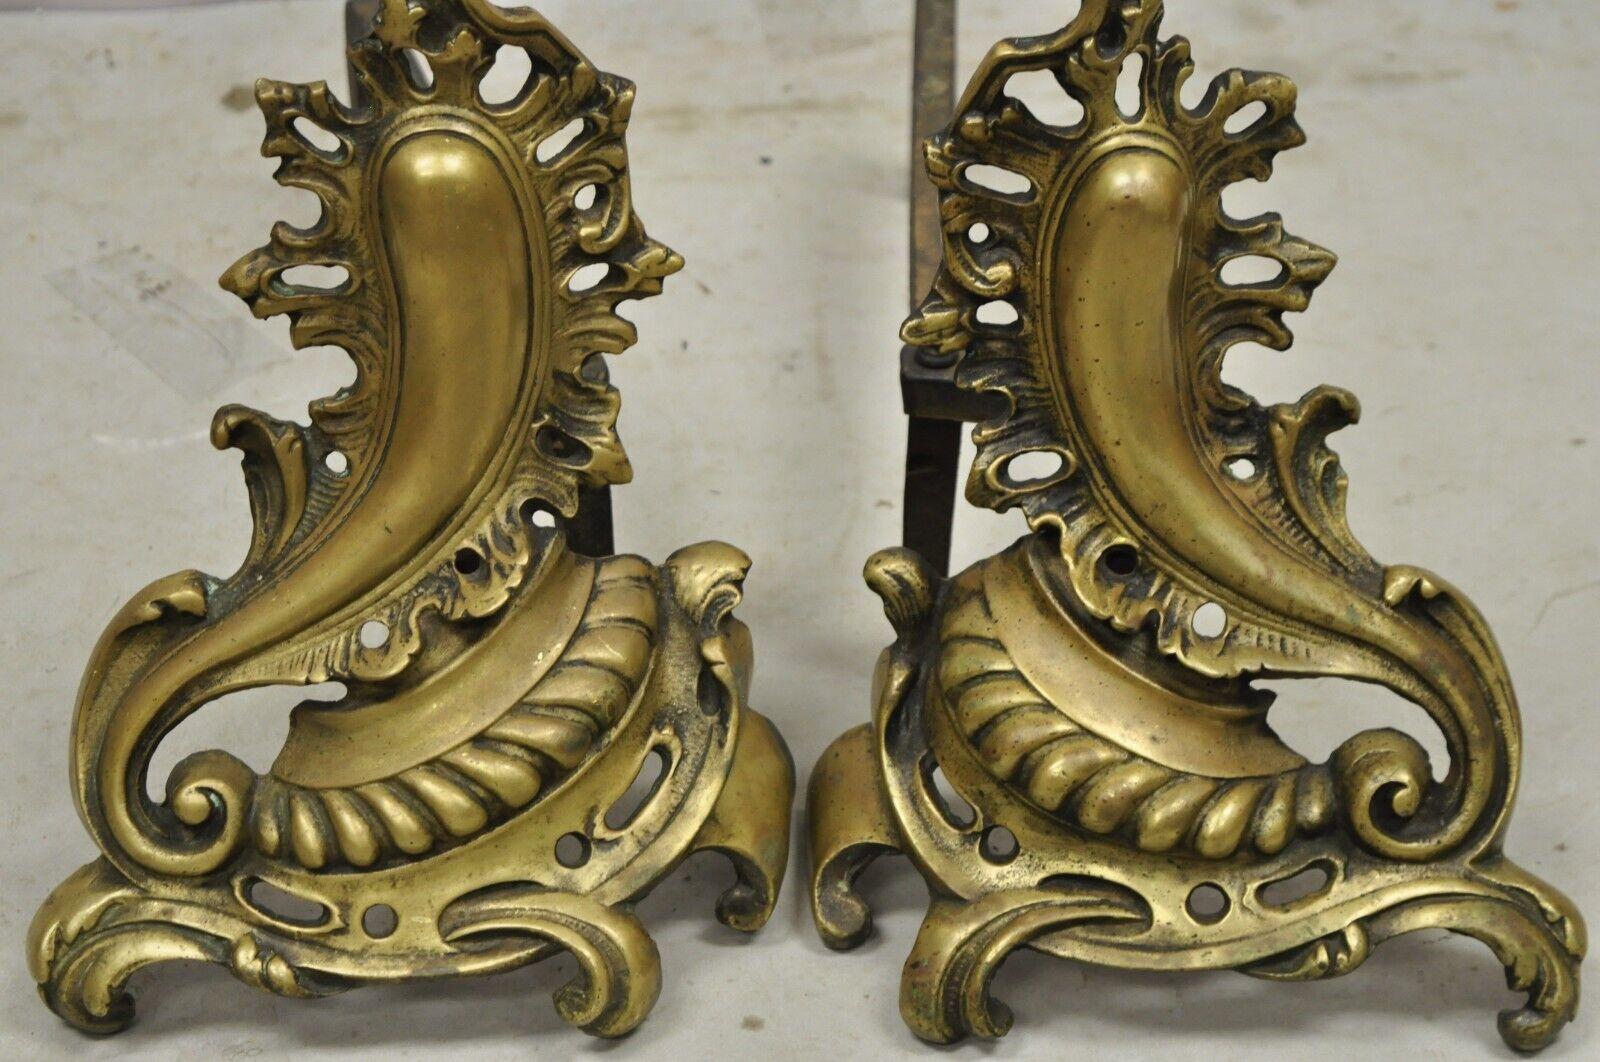 Antique French Rococo Baroque Style Brass Leafy Acanthus Andirons - a Pair For Sale 2